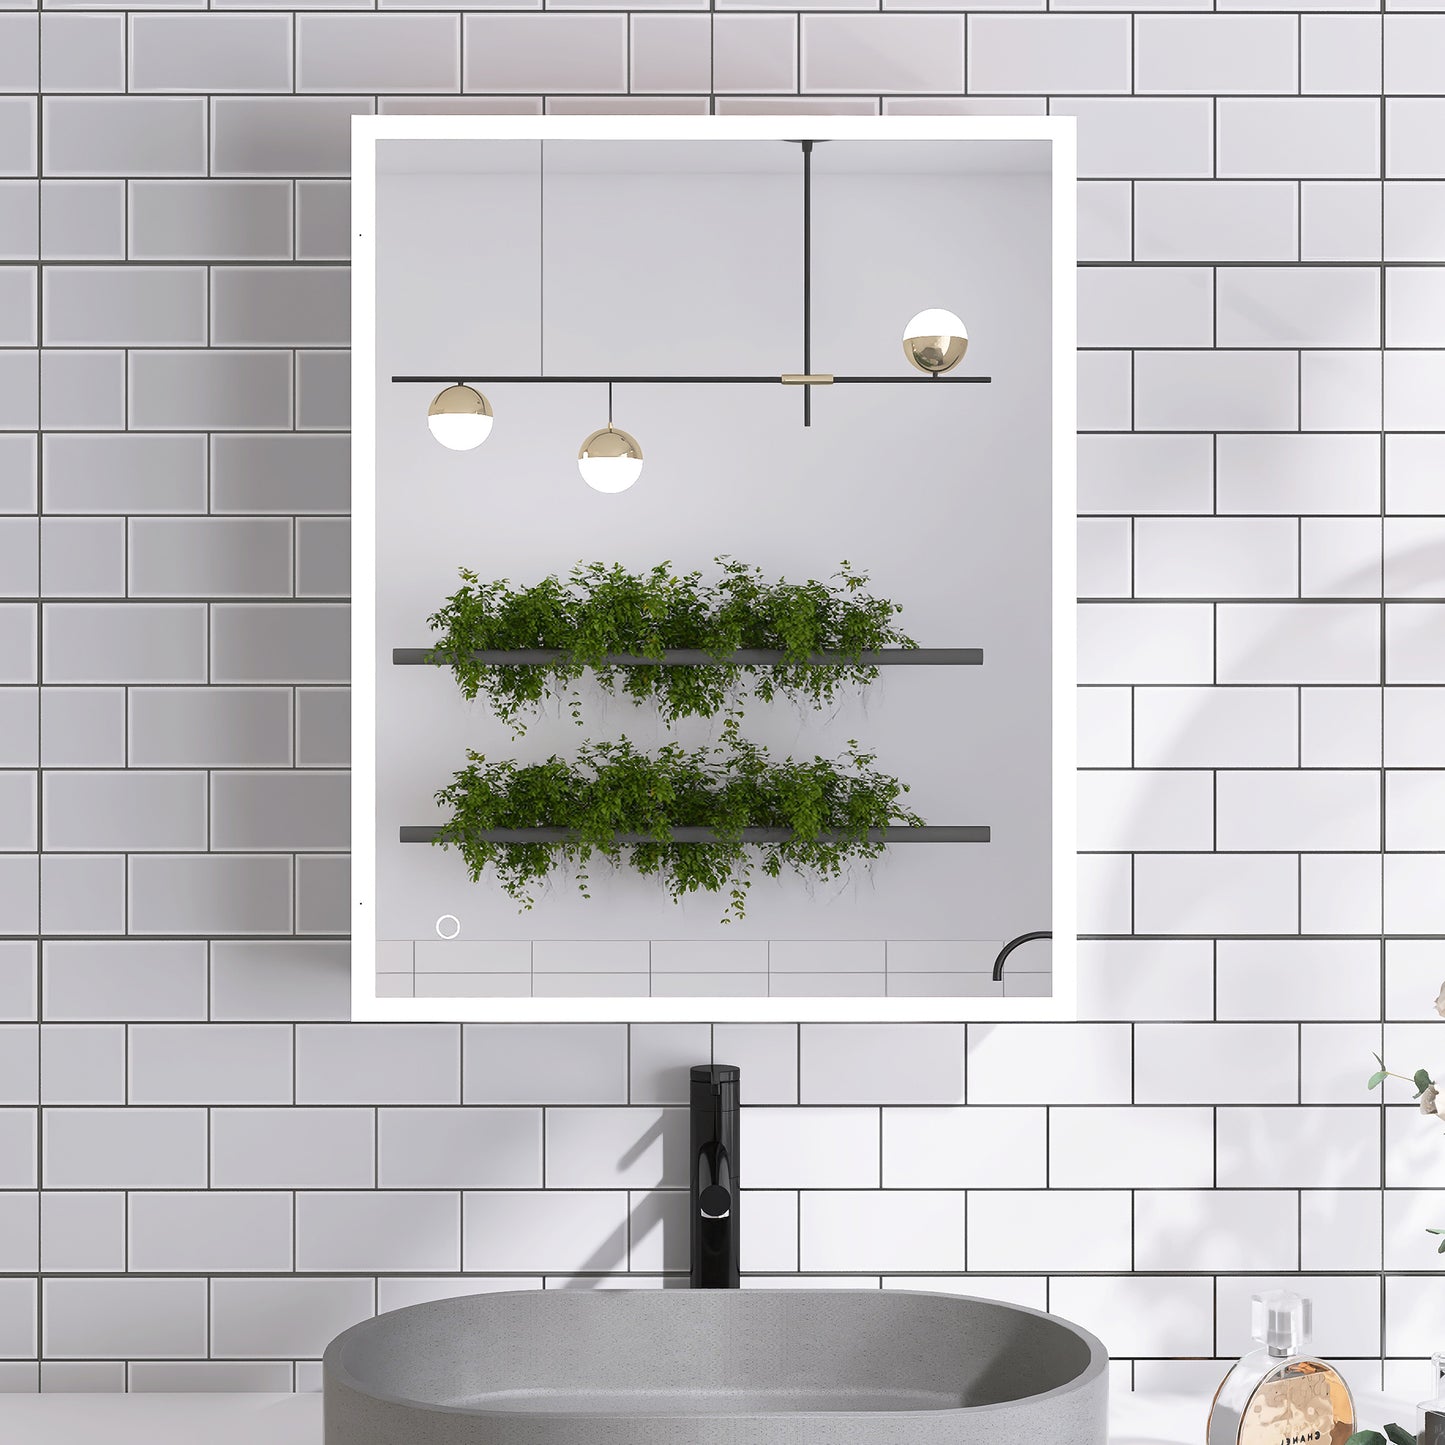 24x30 inch Rectangular LED Lighted Bathroom Medicine Cabinet with Mirror, Anti-Fog, Dimmable Lights, and Aluminum Frame